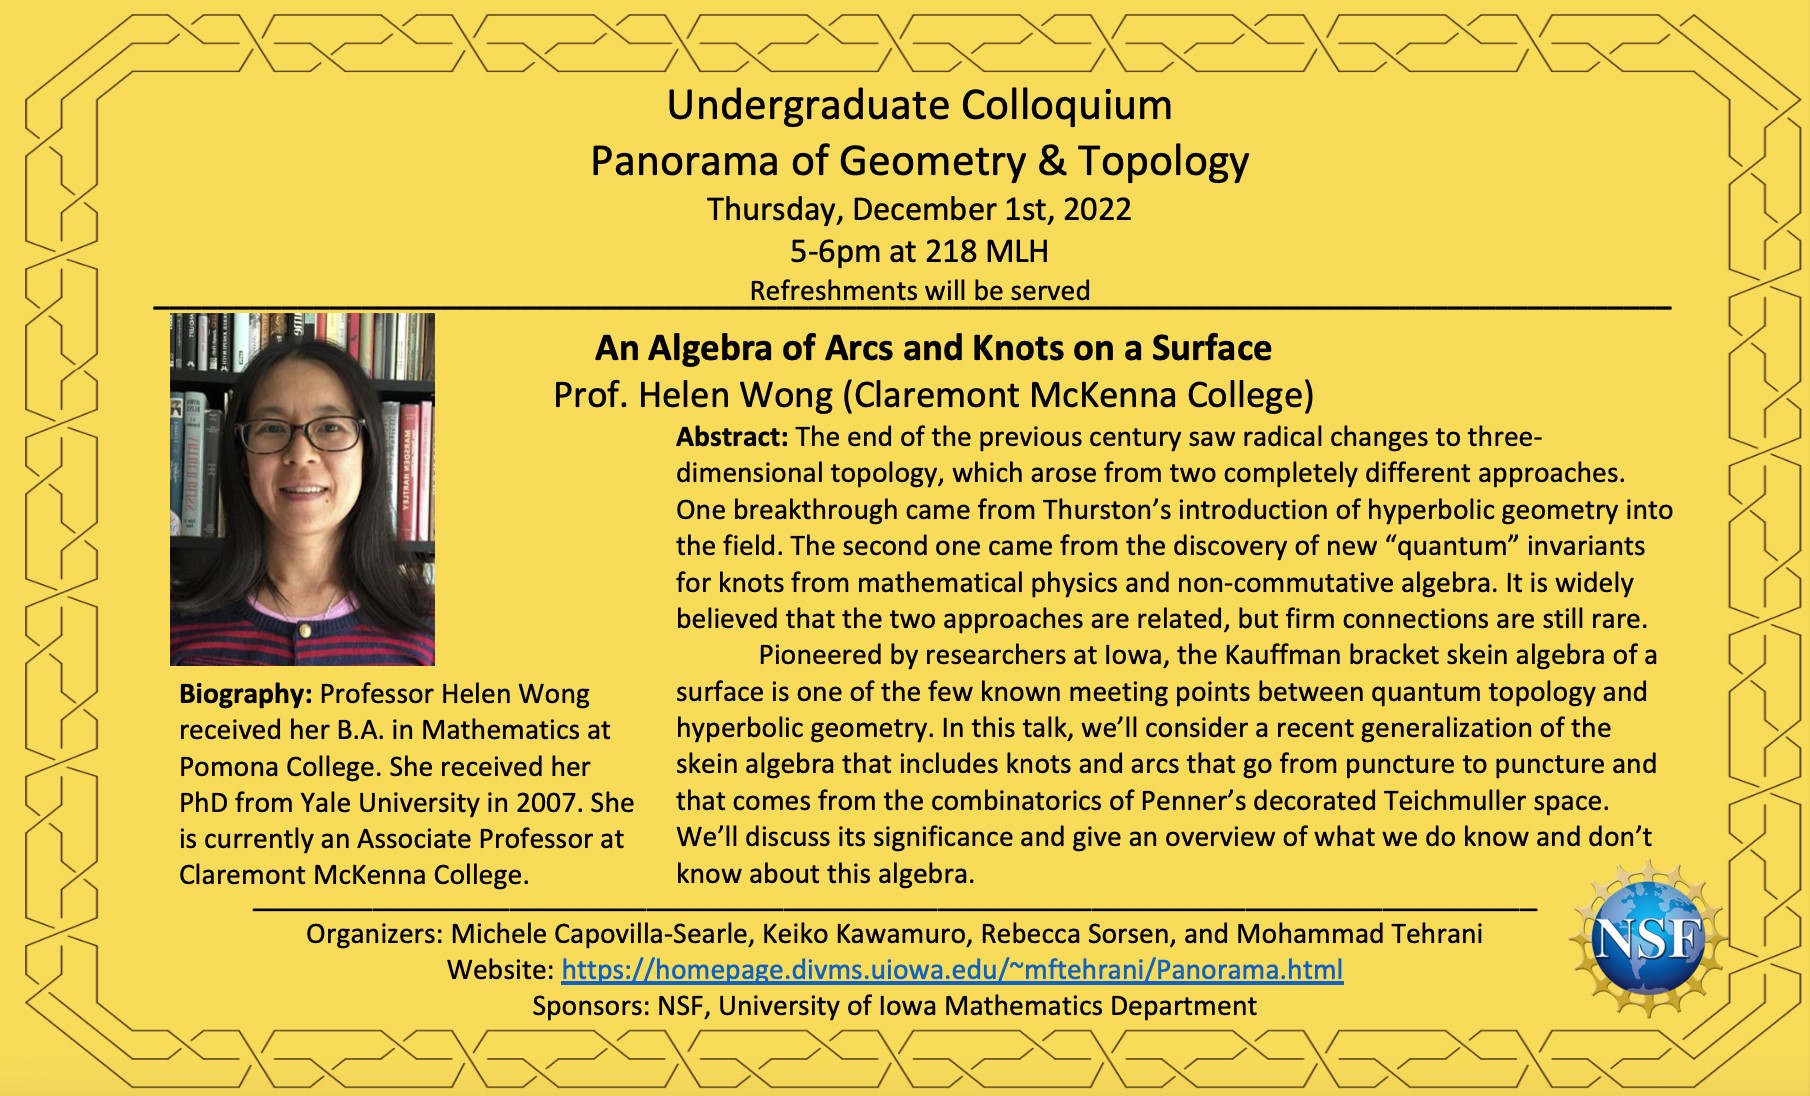 Undergradtue Colloquium Panorama of Geometry and Topology Thursday, December 1st, 2022 5-6 PM at 218 MLH Refreshments will be served An Algebra of Arcs and Knots on a Surface Prof. Helen Wong (Claremont McKenna College)